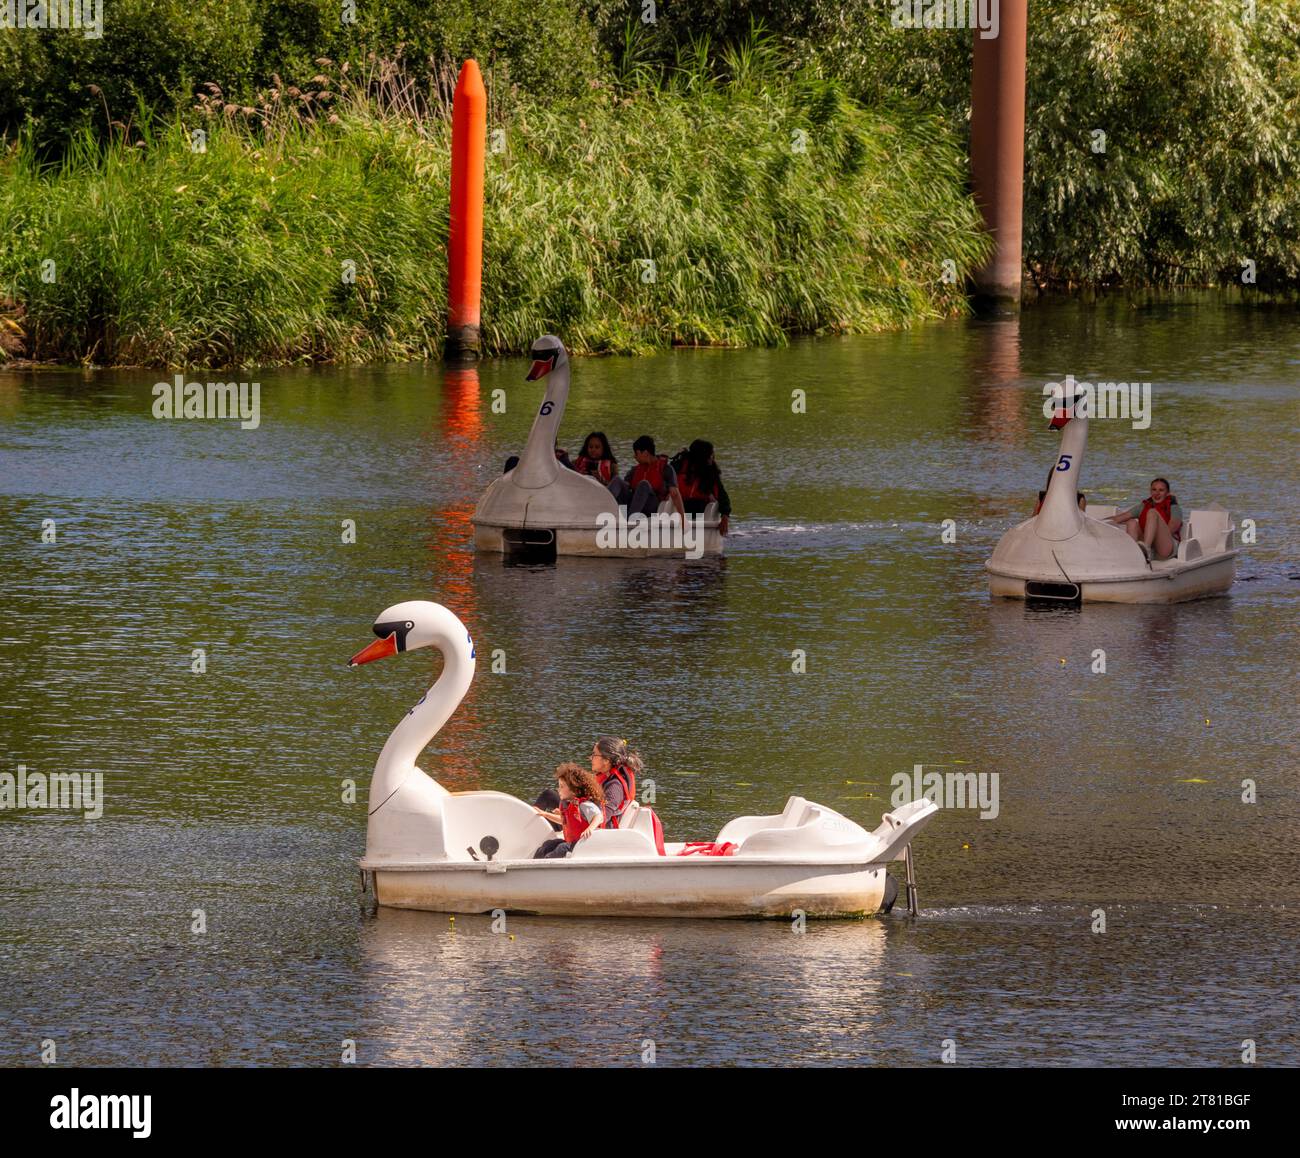 Swan pedalos on the WaterWorks River Olympic Park, Stratford, London, UK. Stock Photo